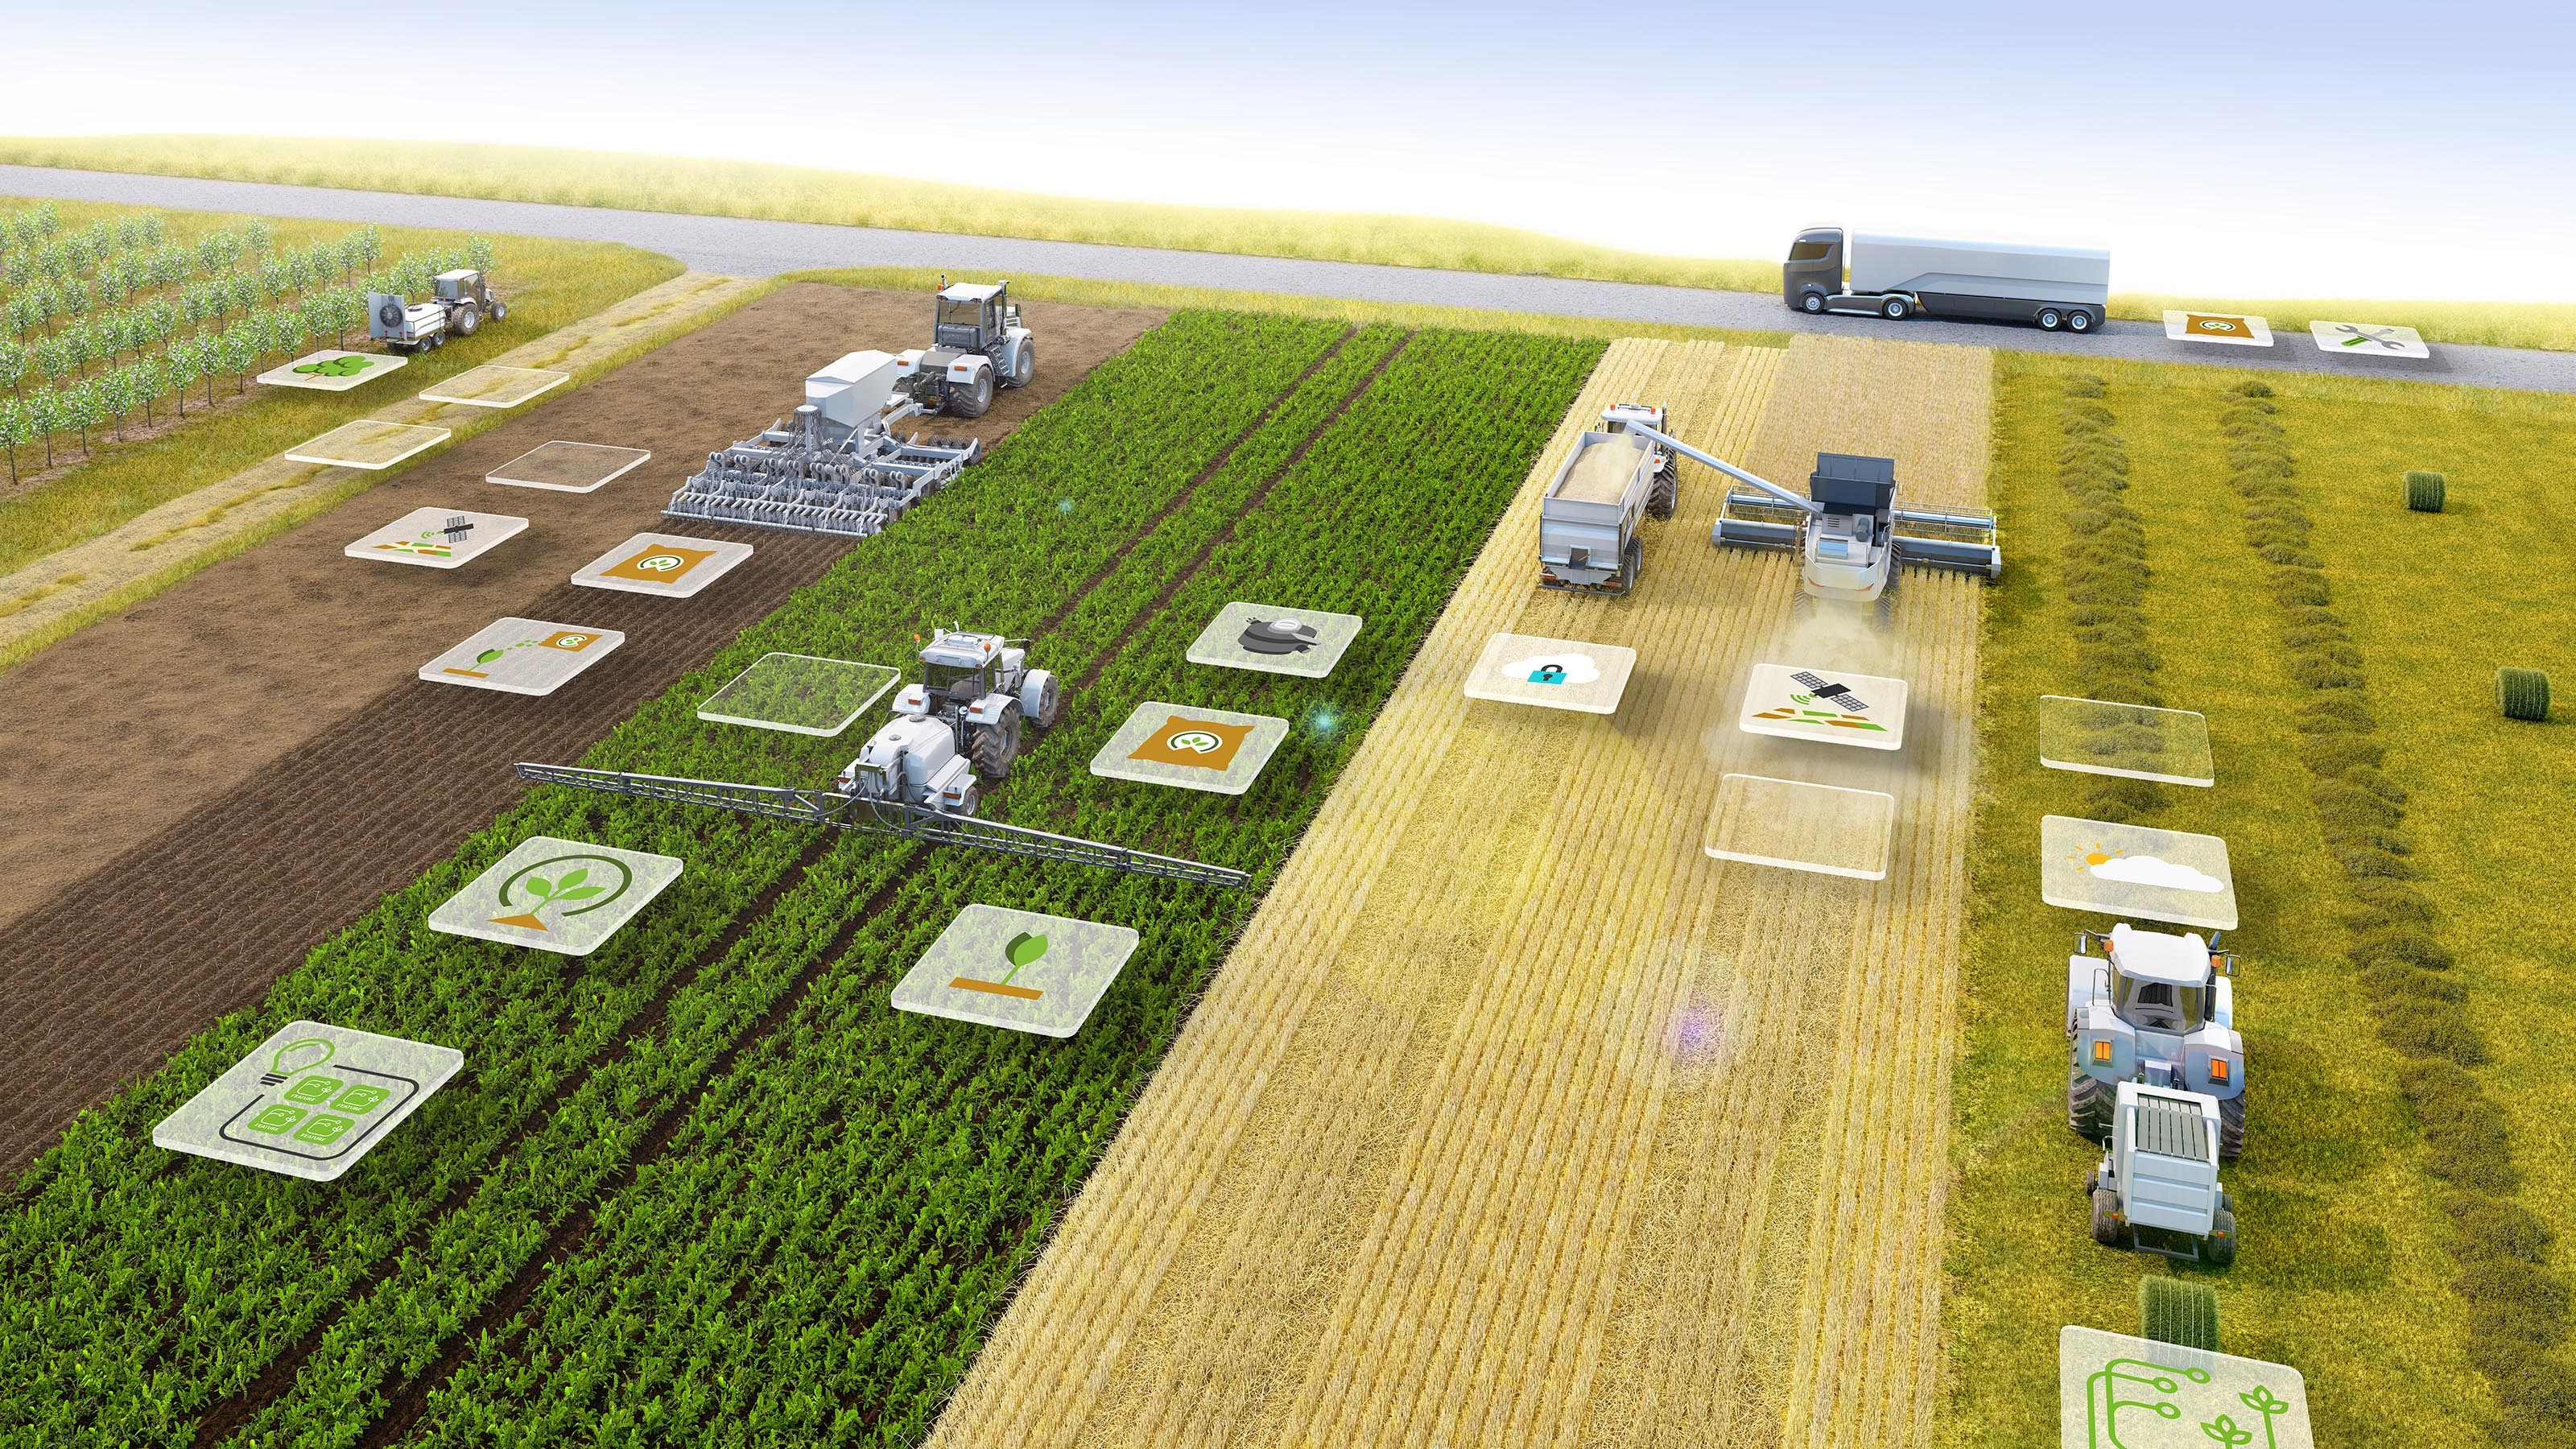 The future of farming Awardwinning new ecosystem paves the way for